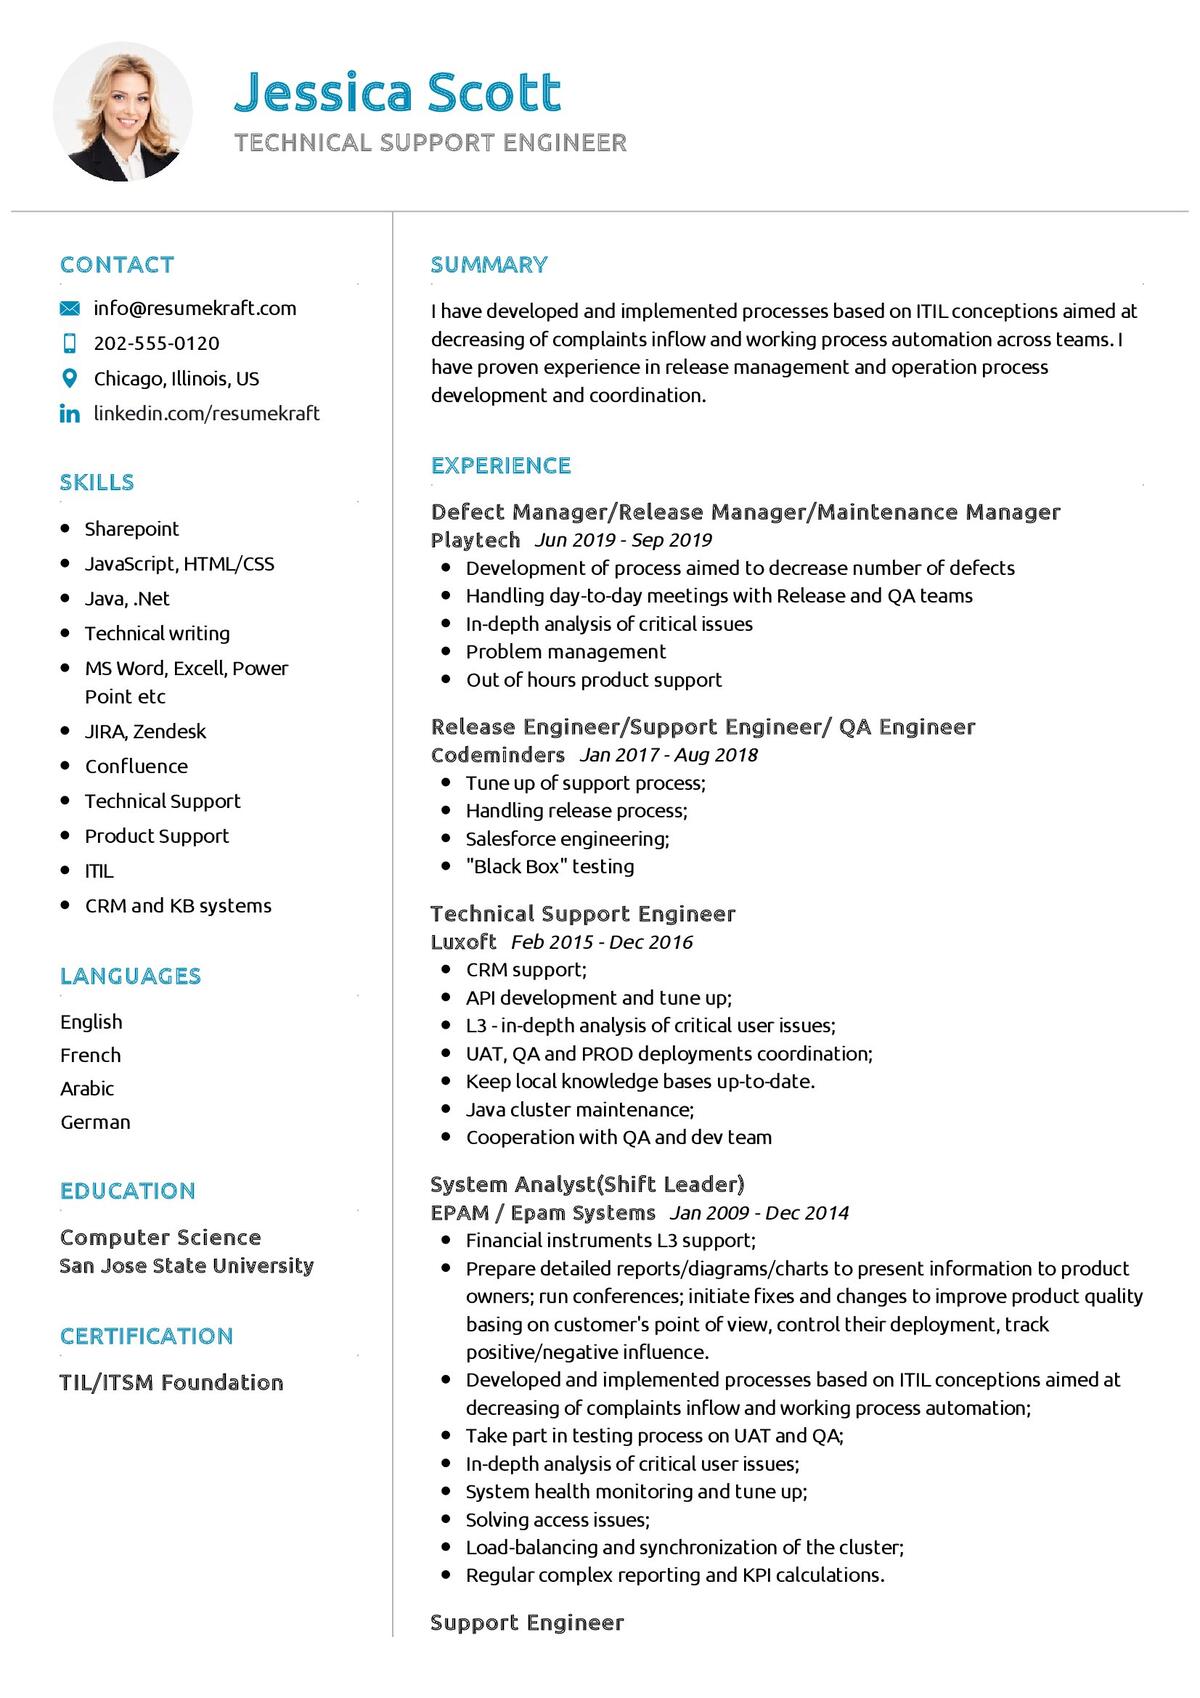 resume sample for technical support engineer